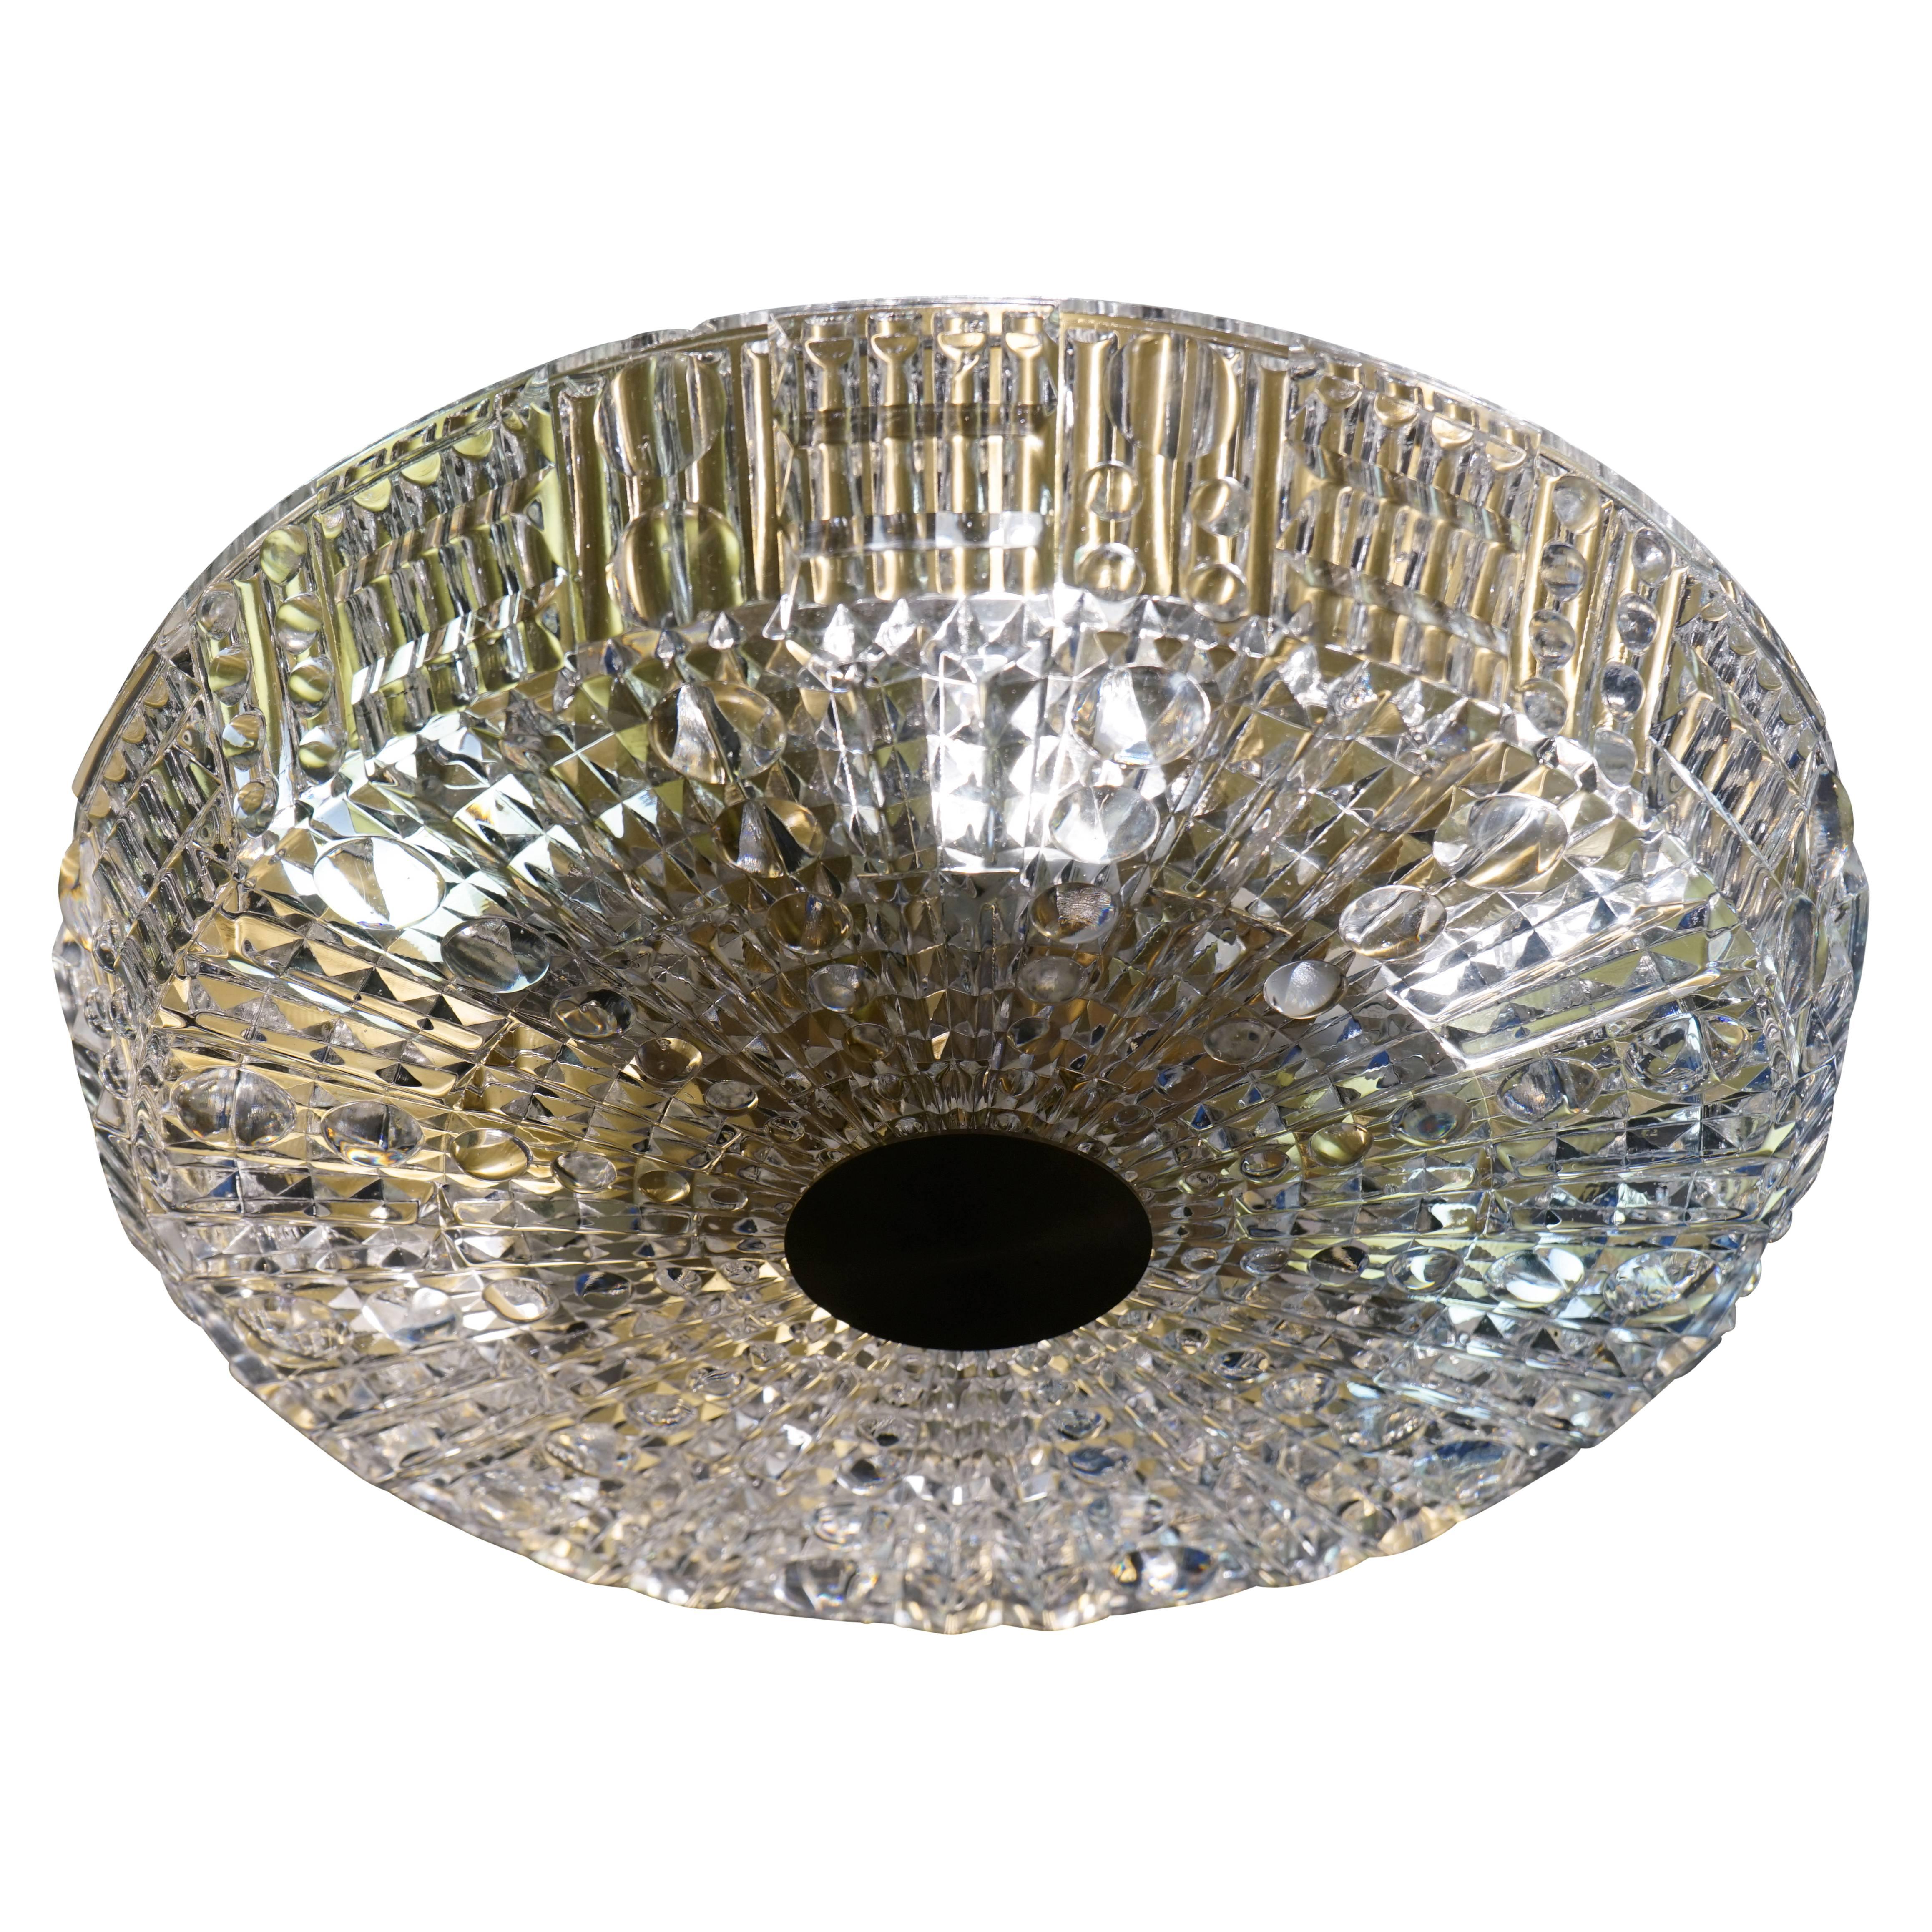 Orrefors Light Fixture In Excellent Condition For Sale In New York, NY